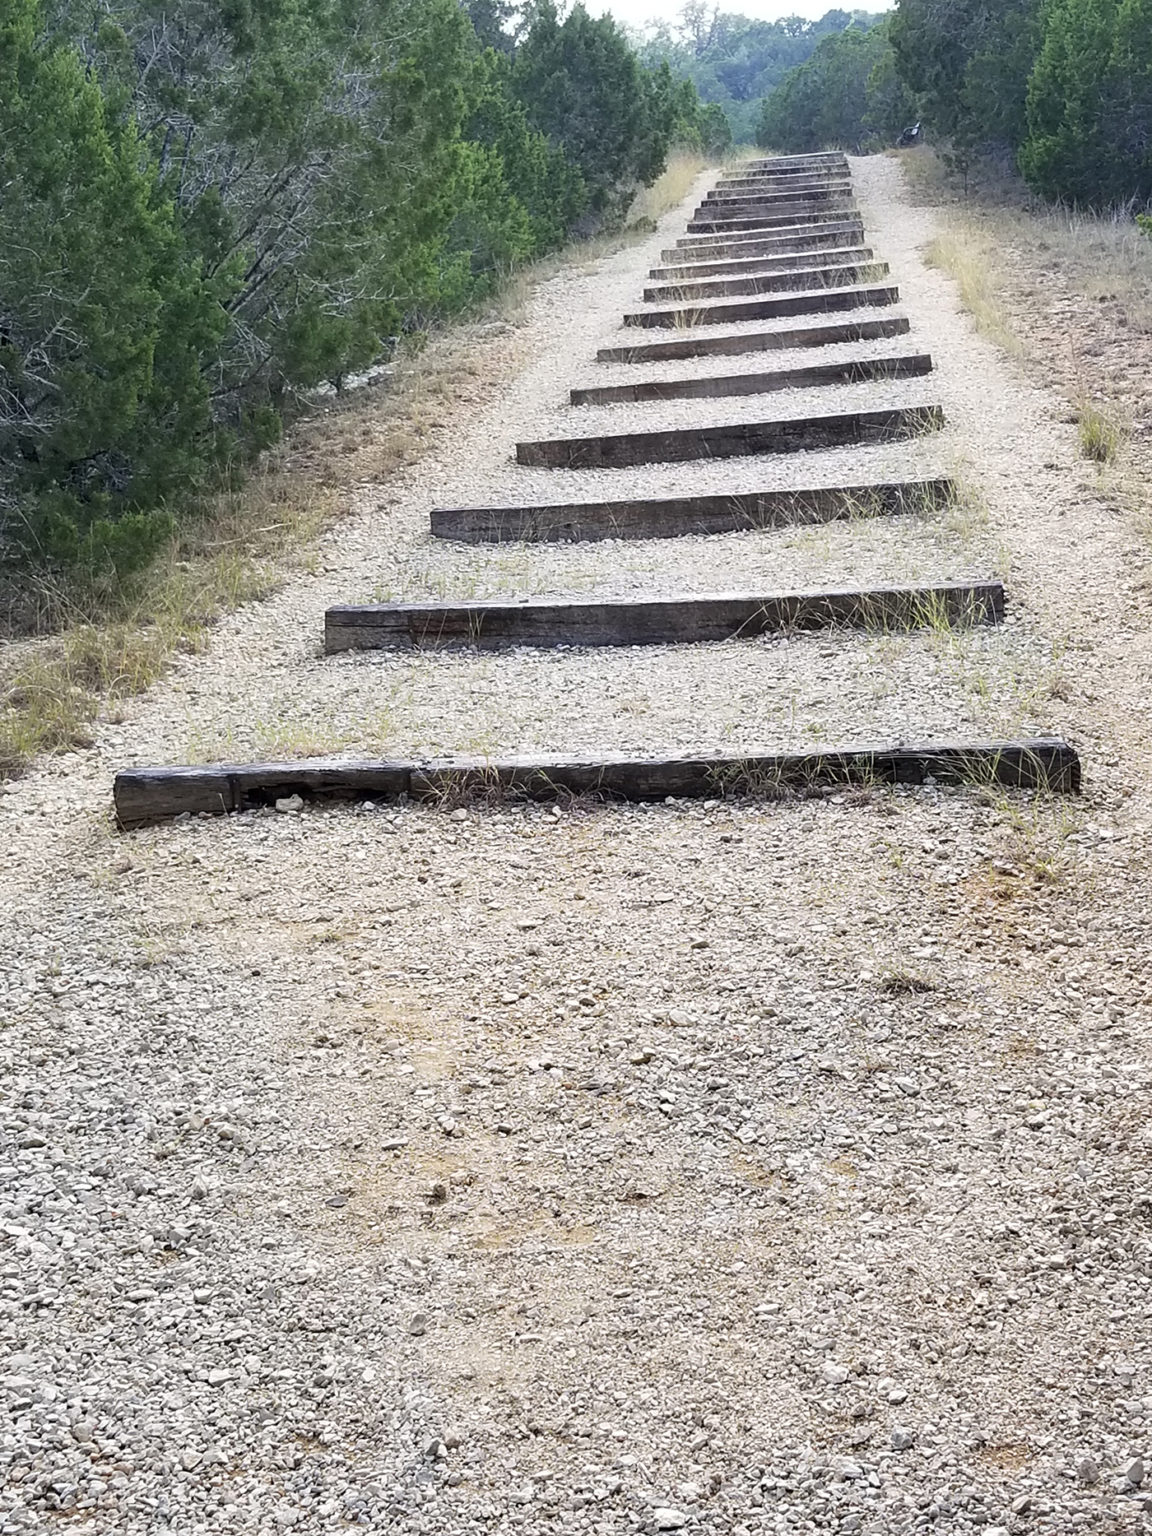 These steps on the main trail look daunting but they offer hikers a good workout!